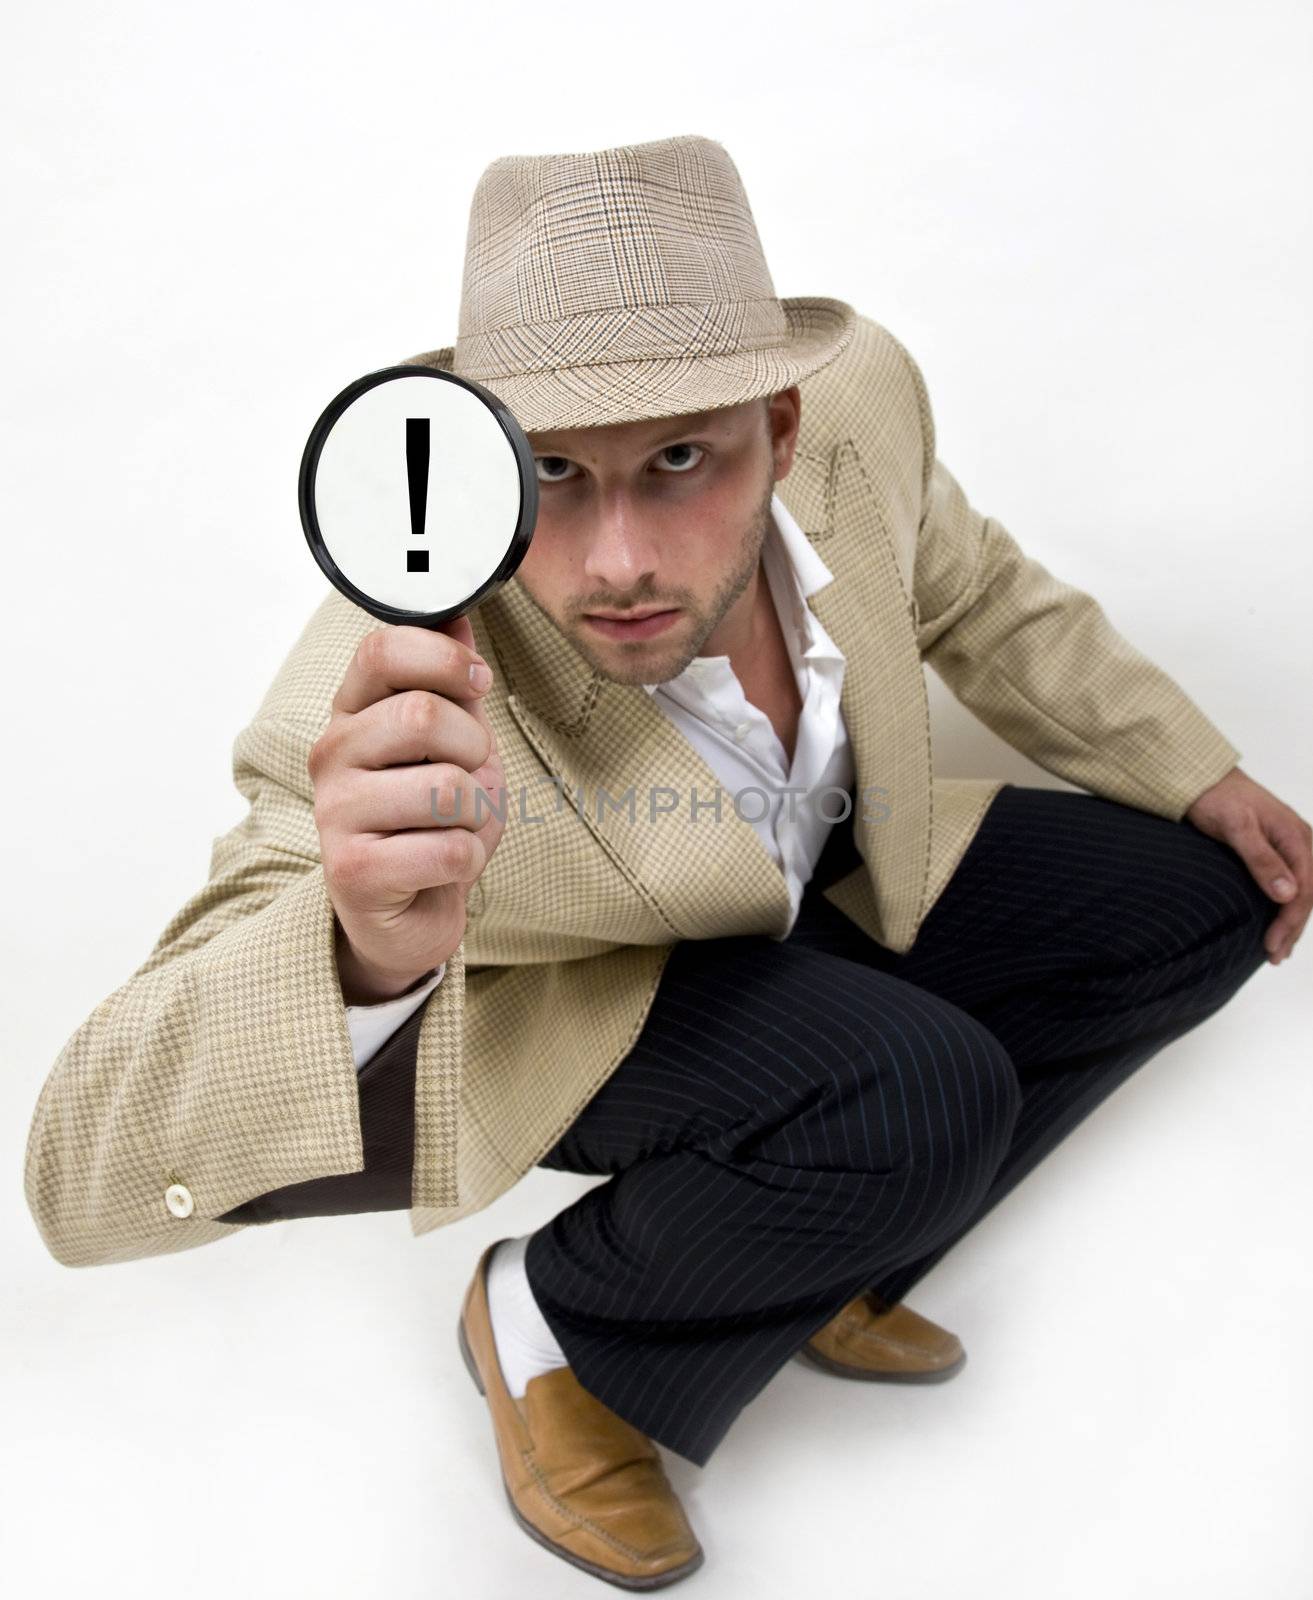 spying man with magnifying glass on isolated background
